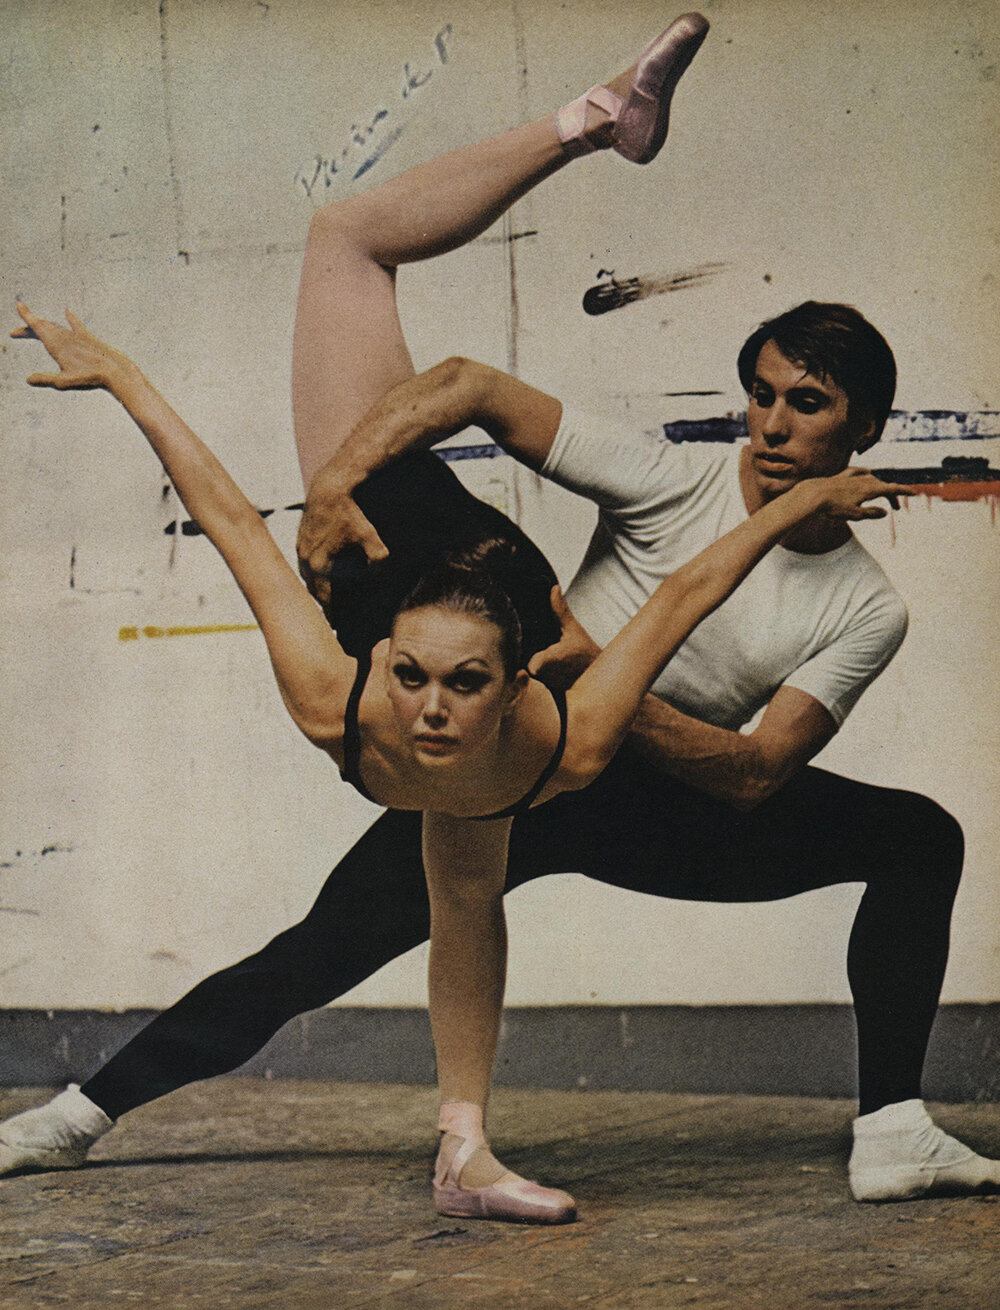 From Michals' portfolio of images from the New York City Ballet in Saratoga Springs, for Vogue, December 1972.